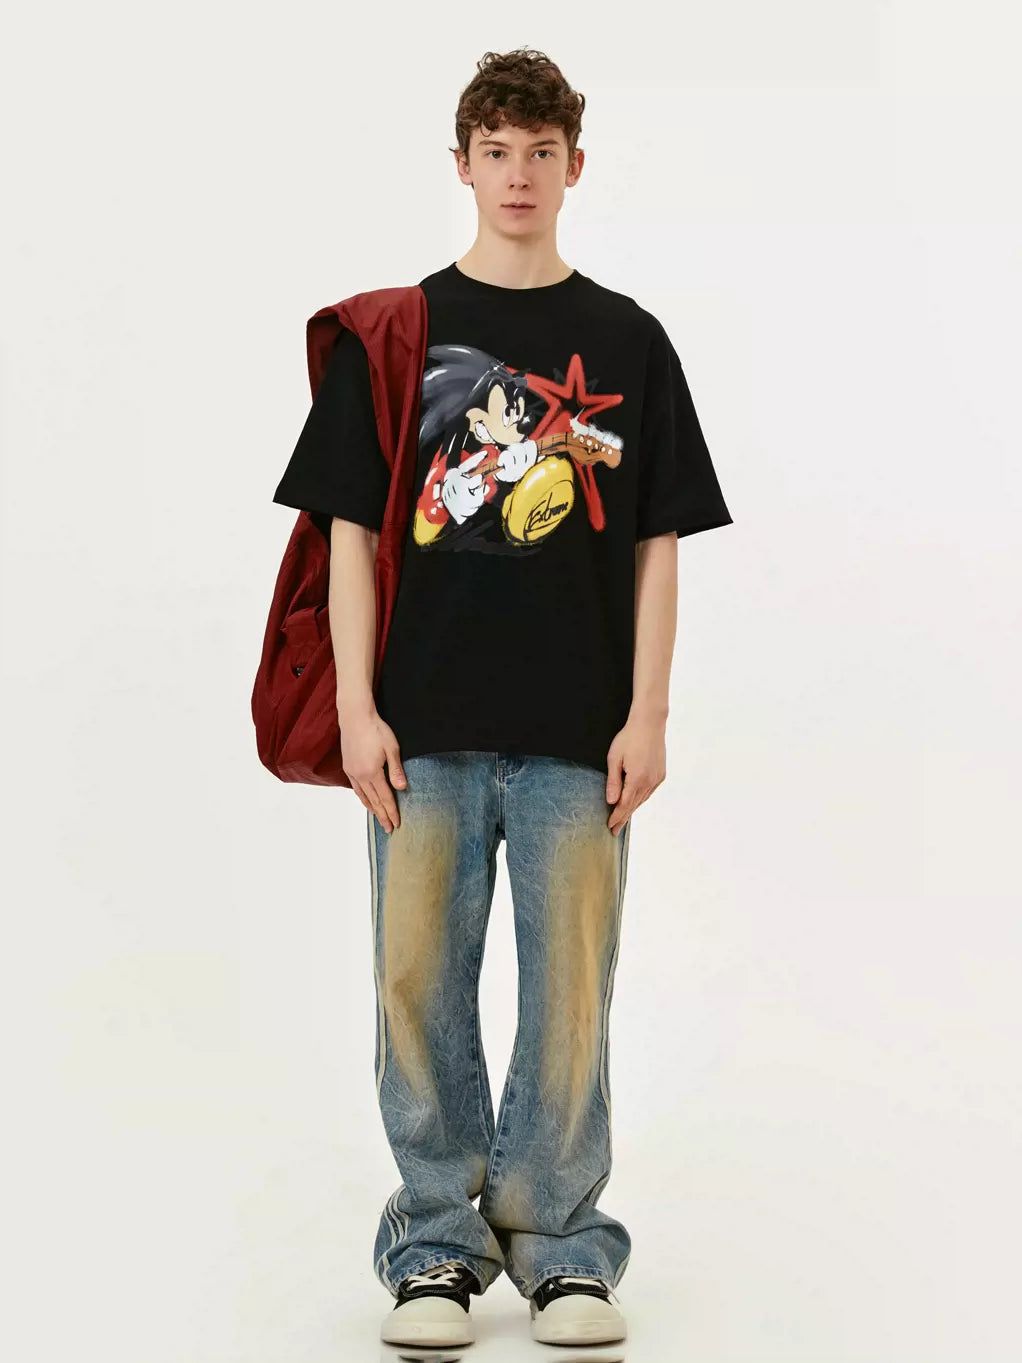 Mickey Printed T-Shirt Korean Street Fashion T-Shirt By Made Extreme Shop Online at OH Vault